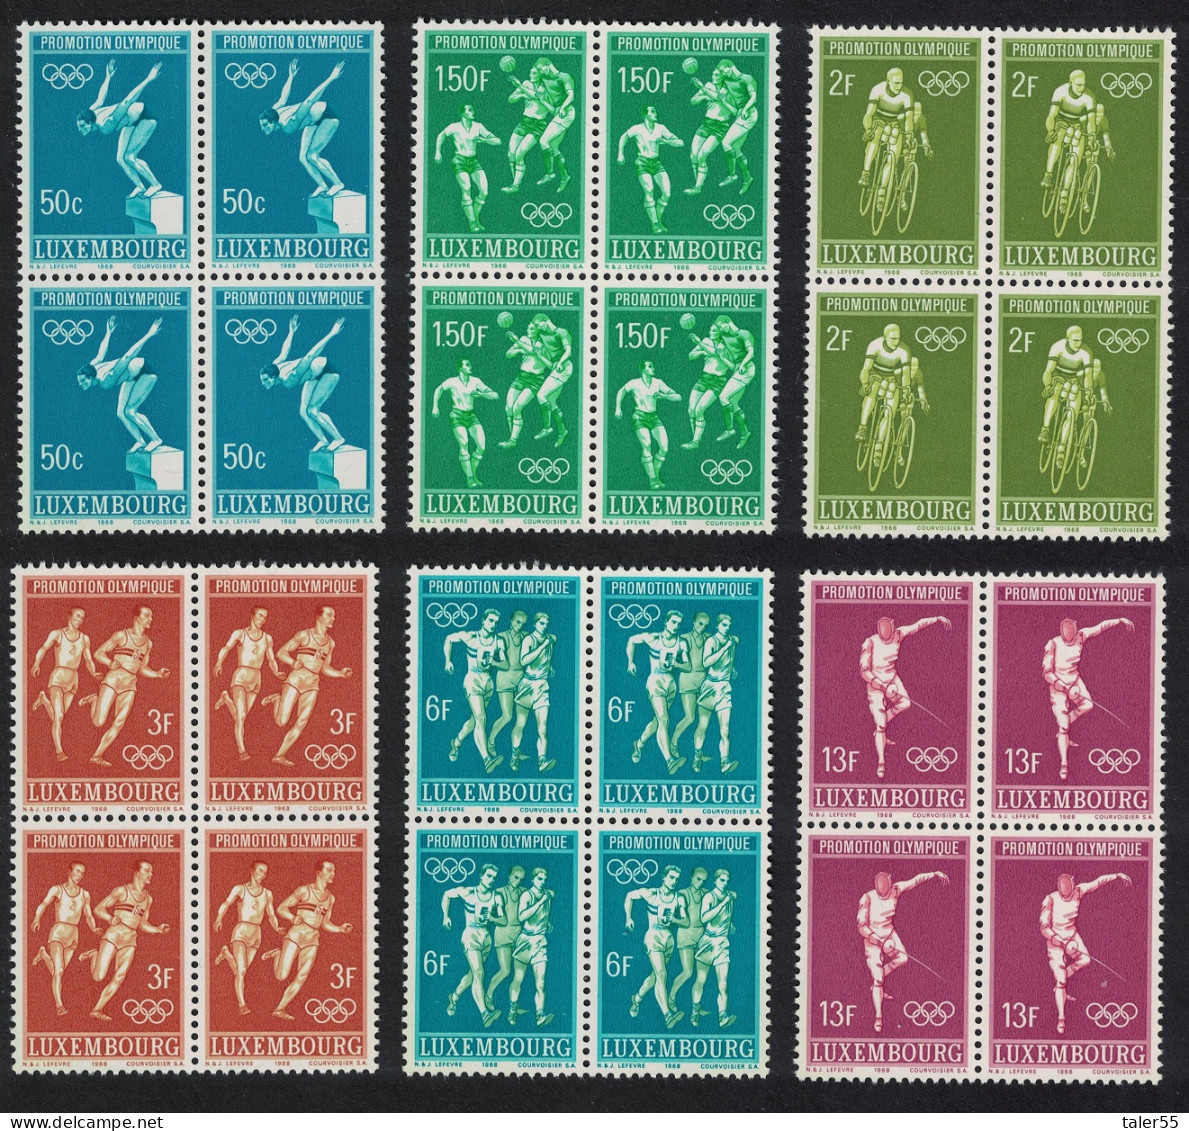 Luxembourg Football Cycling Olympic Games 6v Blocks Of 4 1968 MNH SG#815-820 MI#765-770 - Unused Stamps